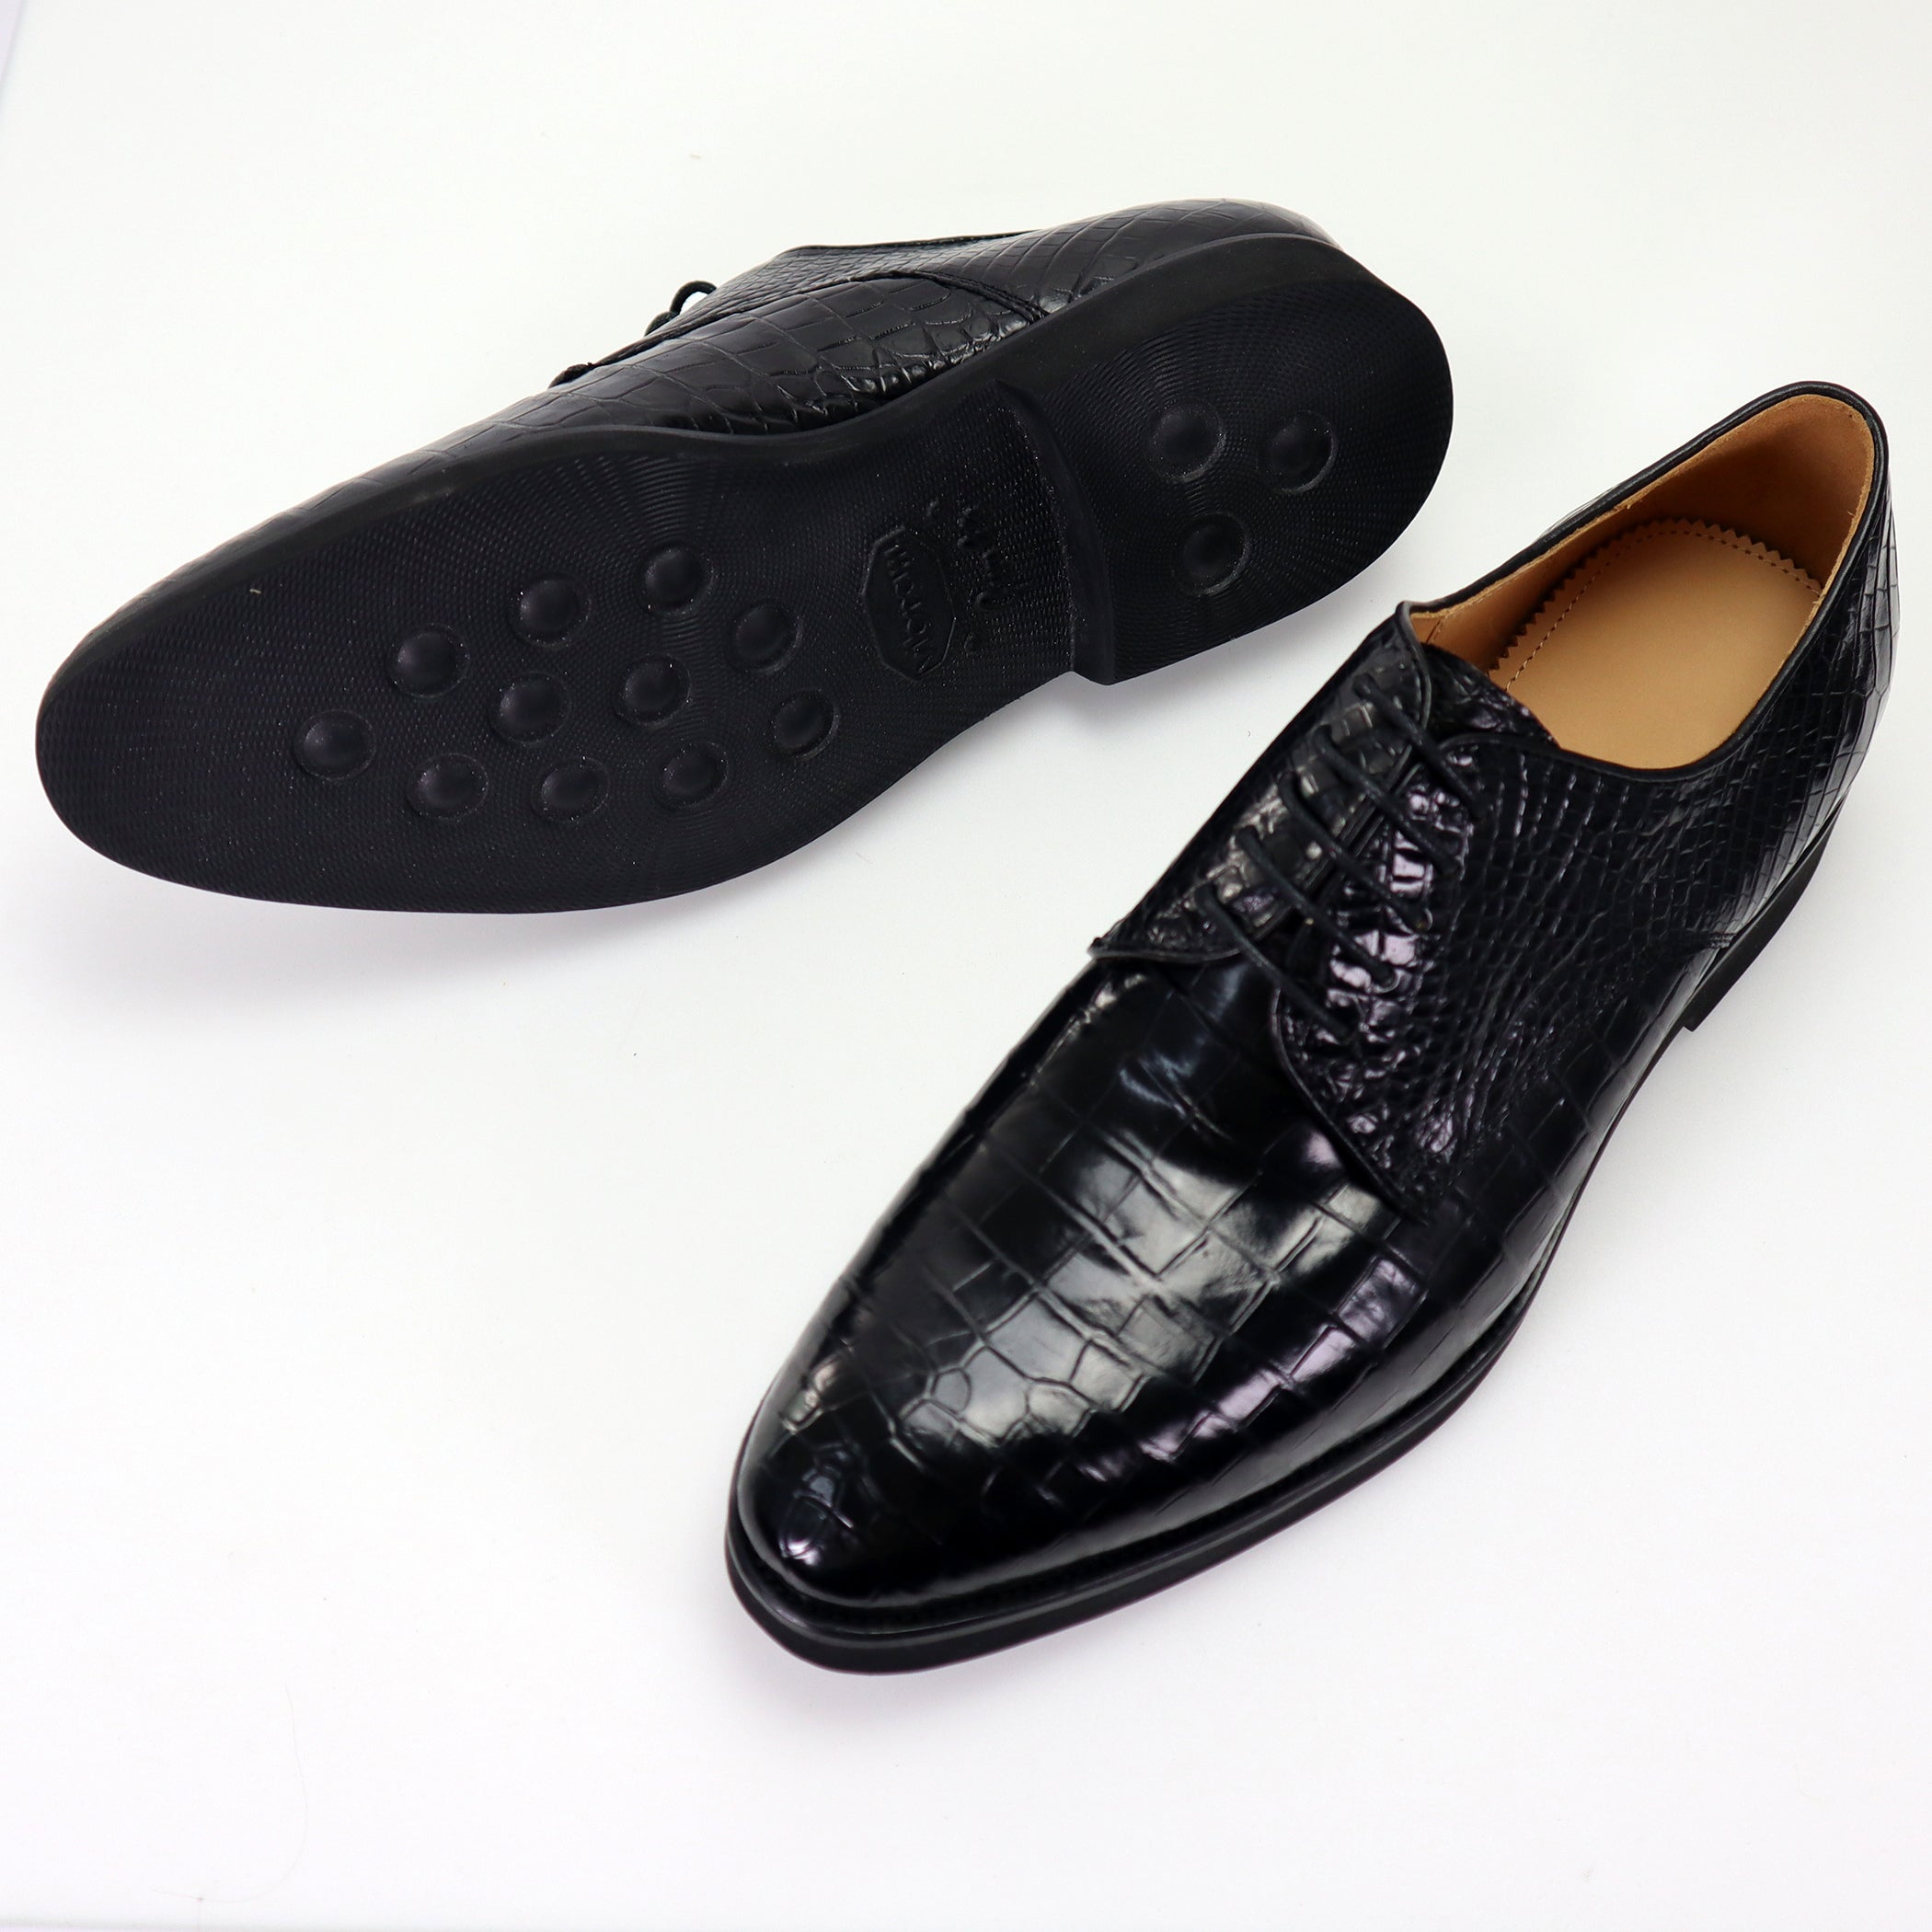 Handcrafted Alligator Derby Perforated Lace-Up Dress Shoes: Genuine Elegance and Luxury